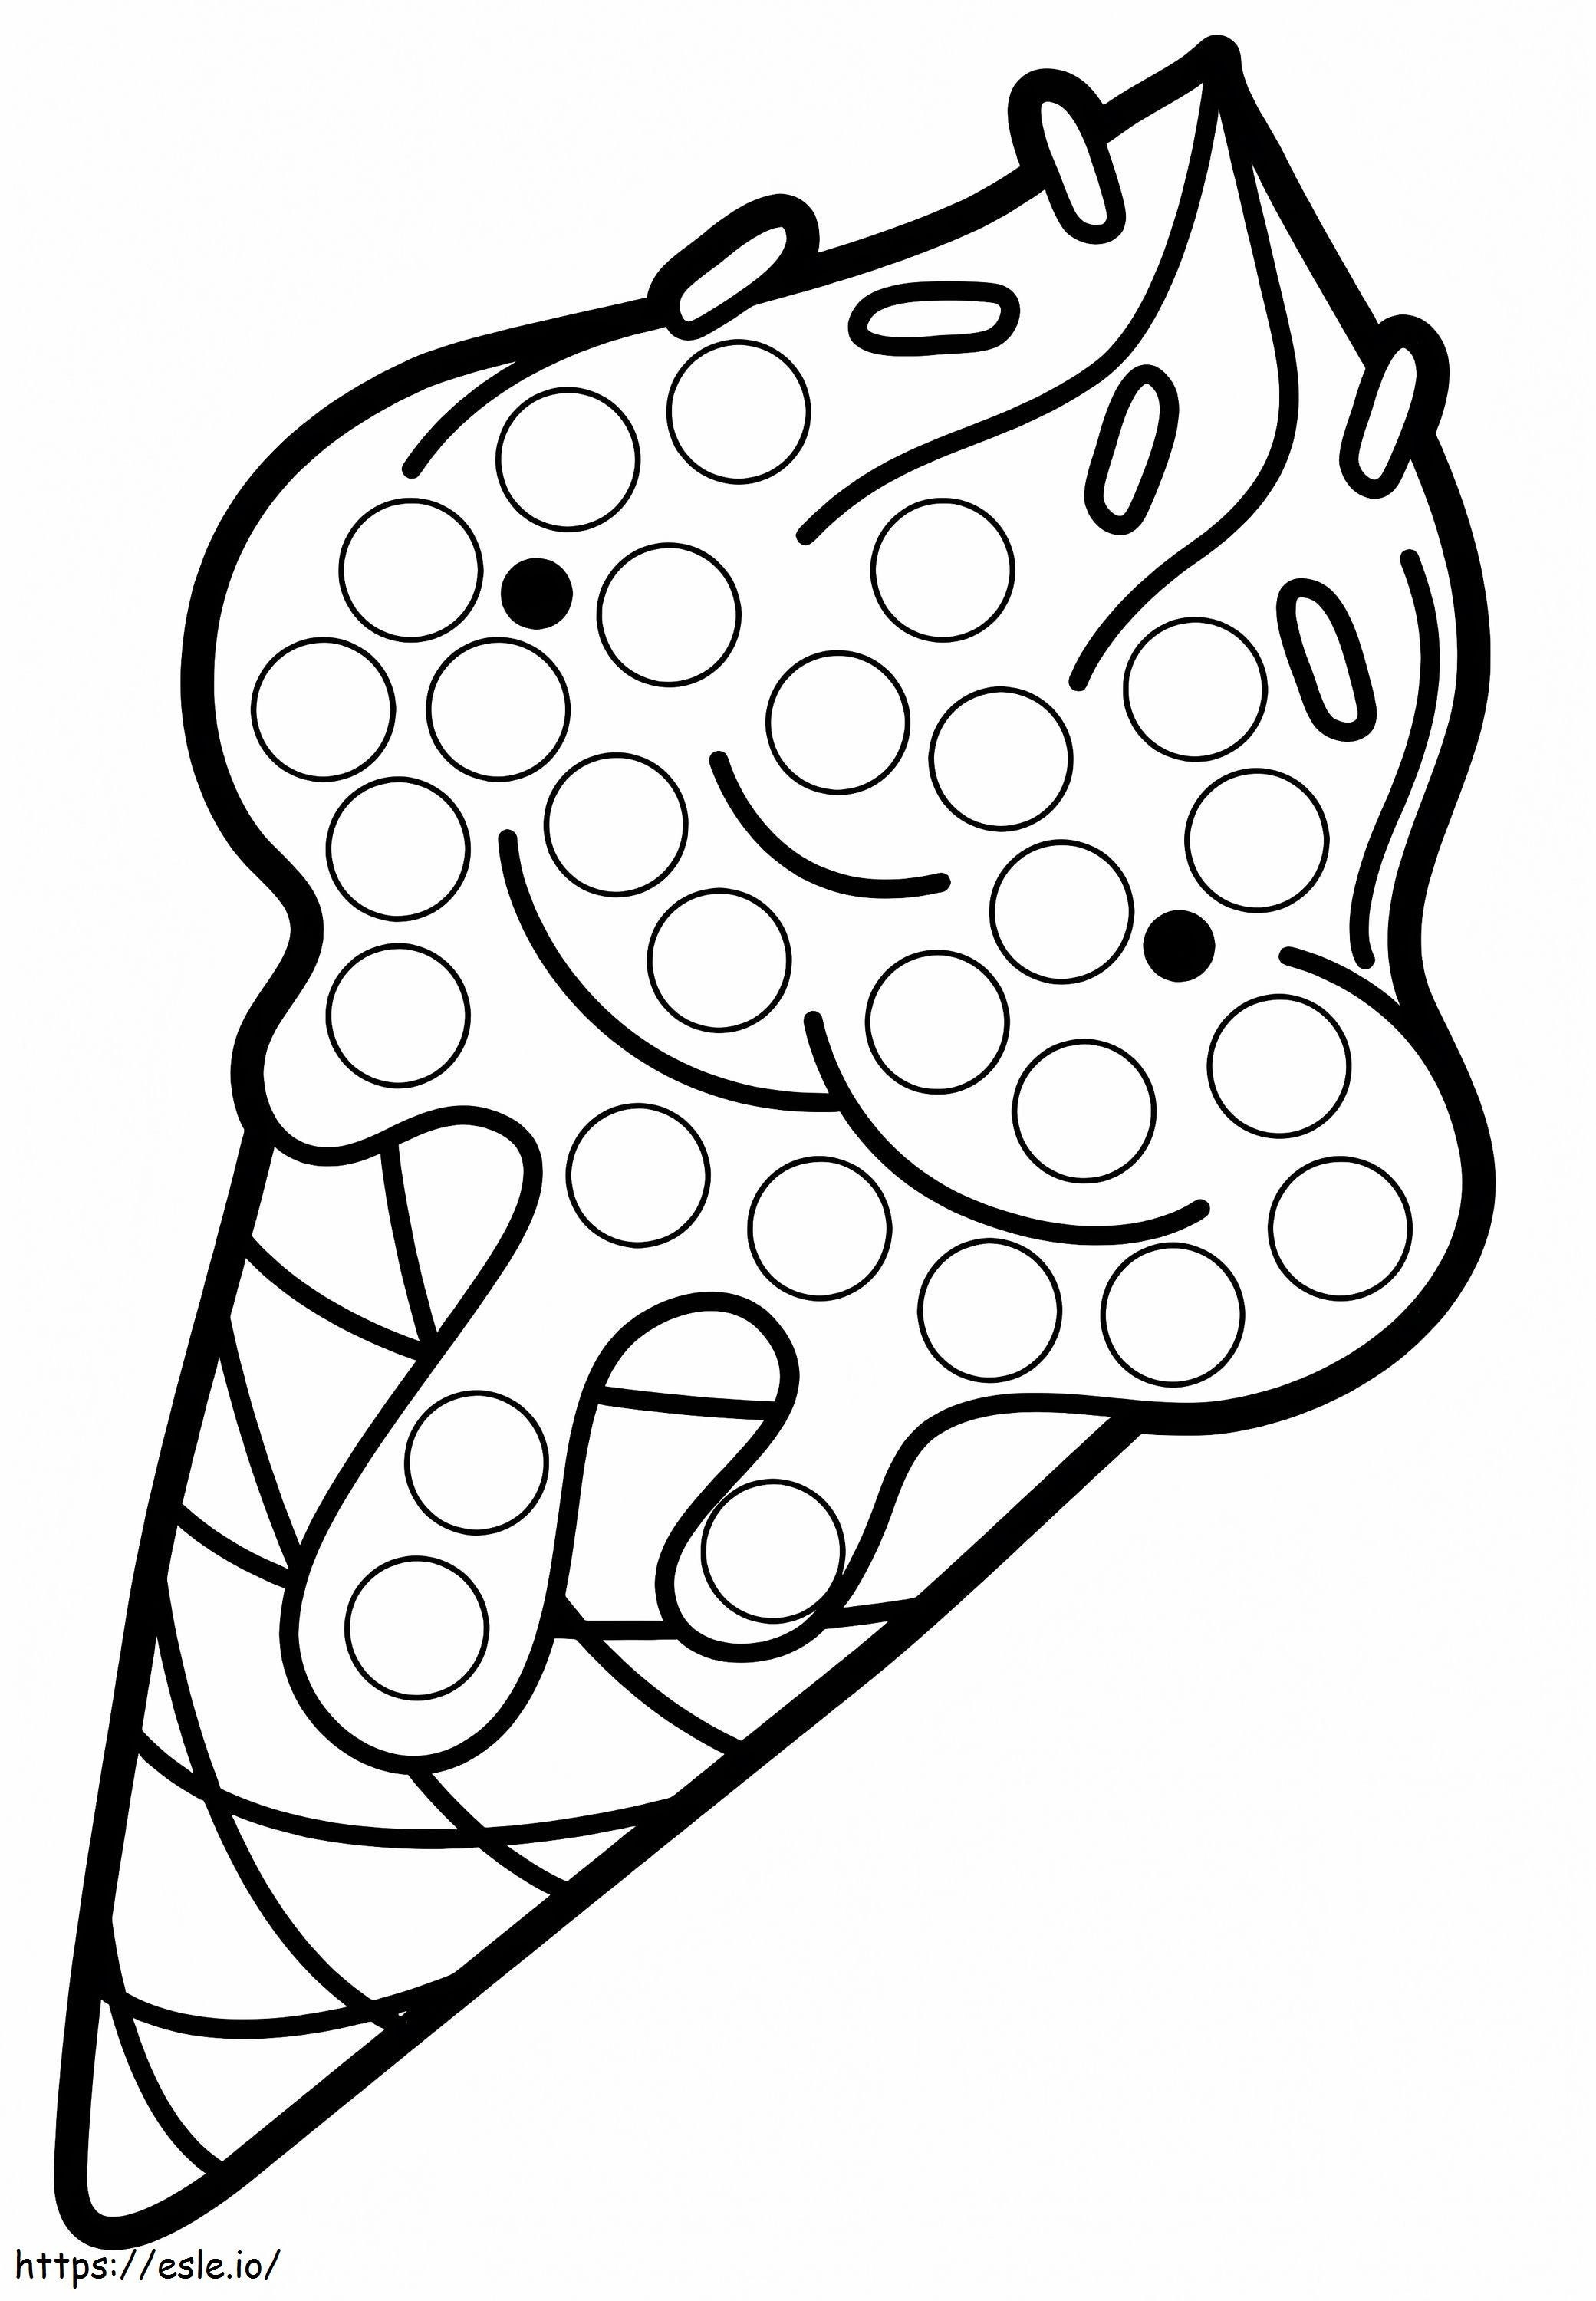 Ice Cream Dot Marker coloring page